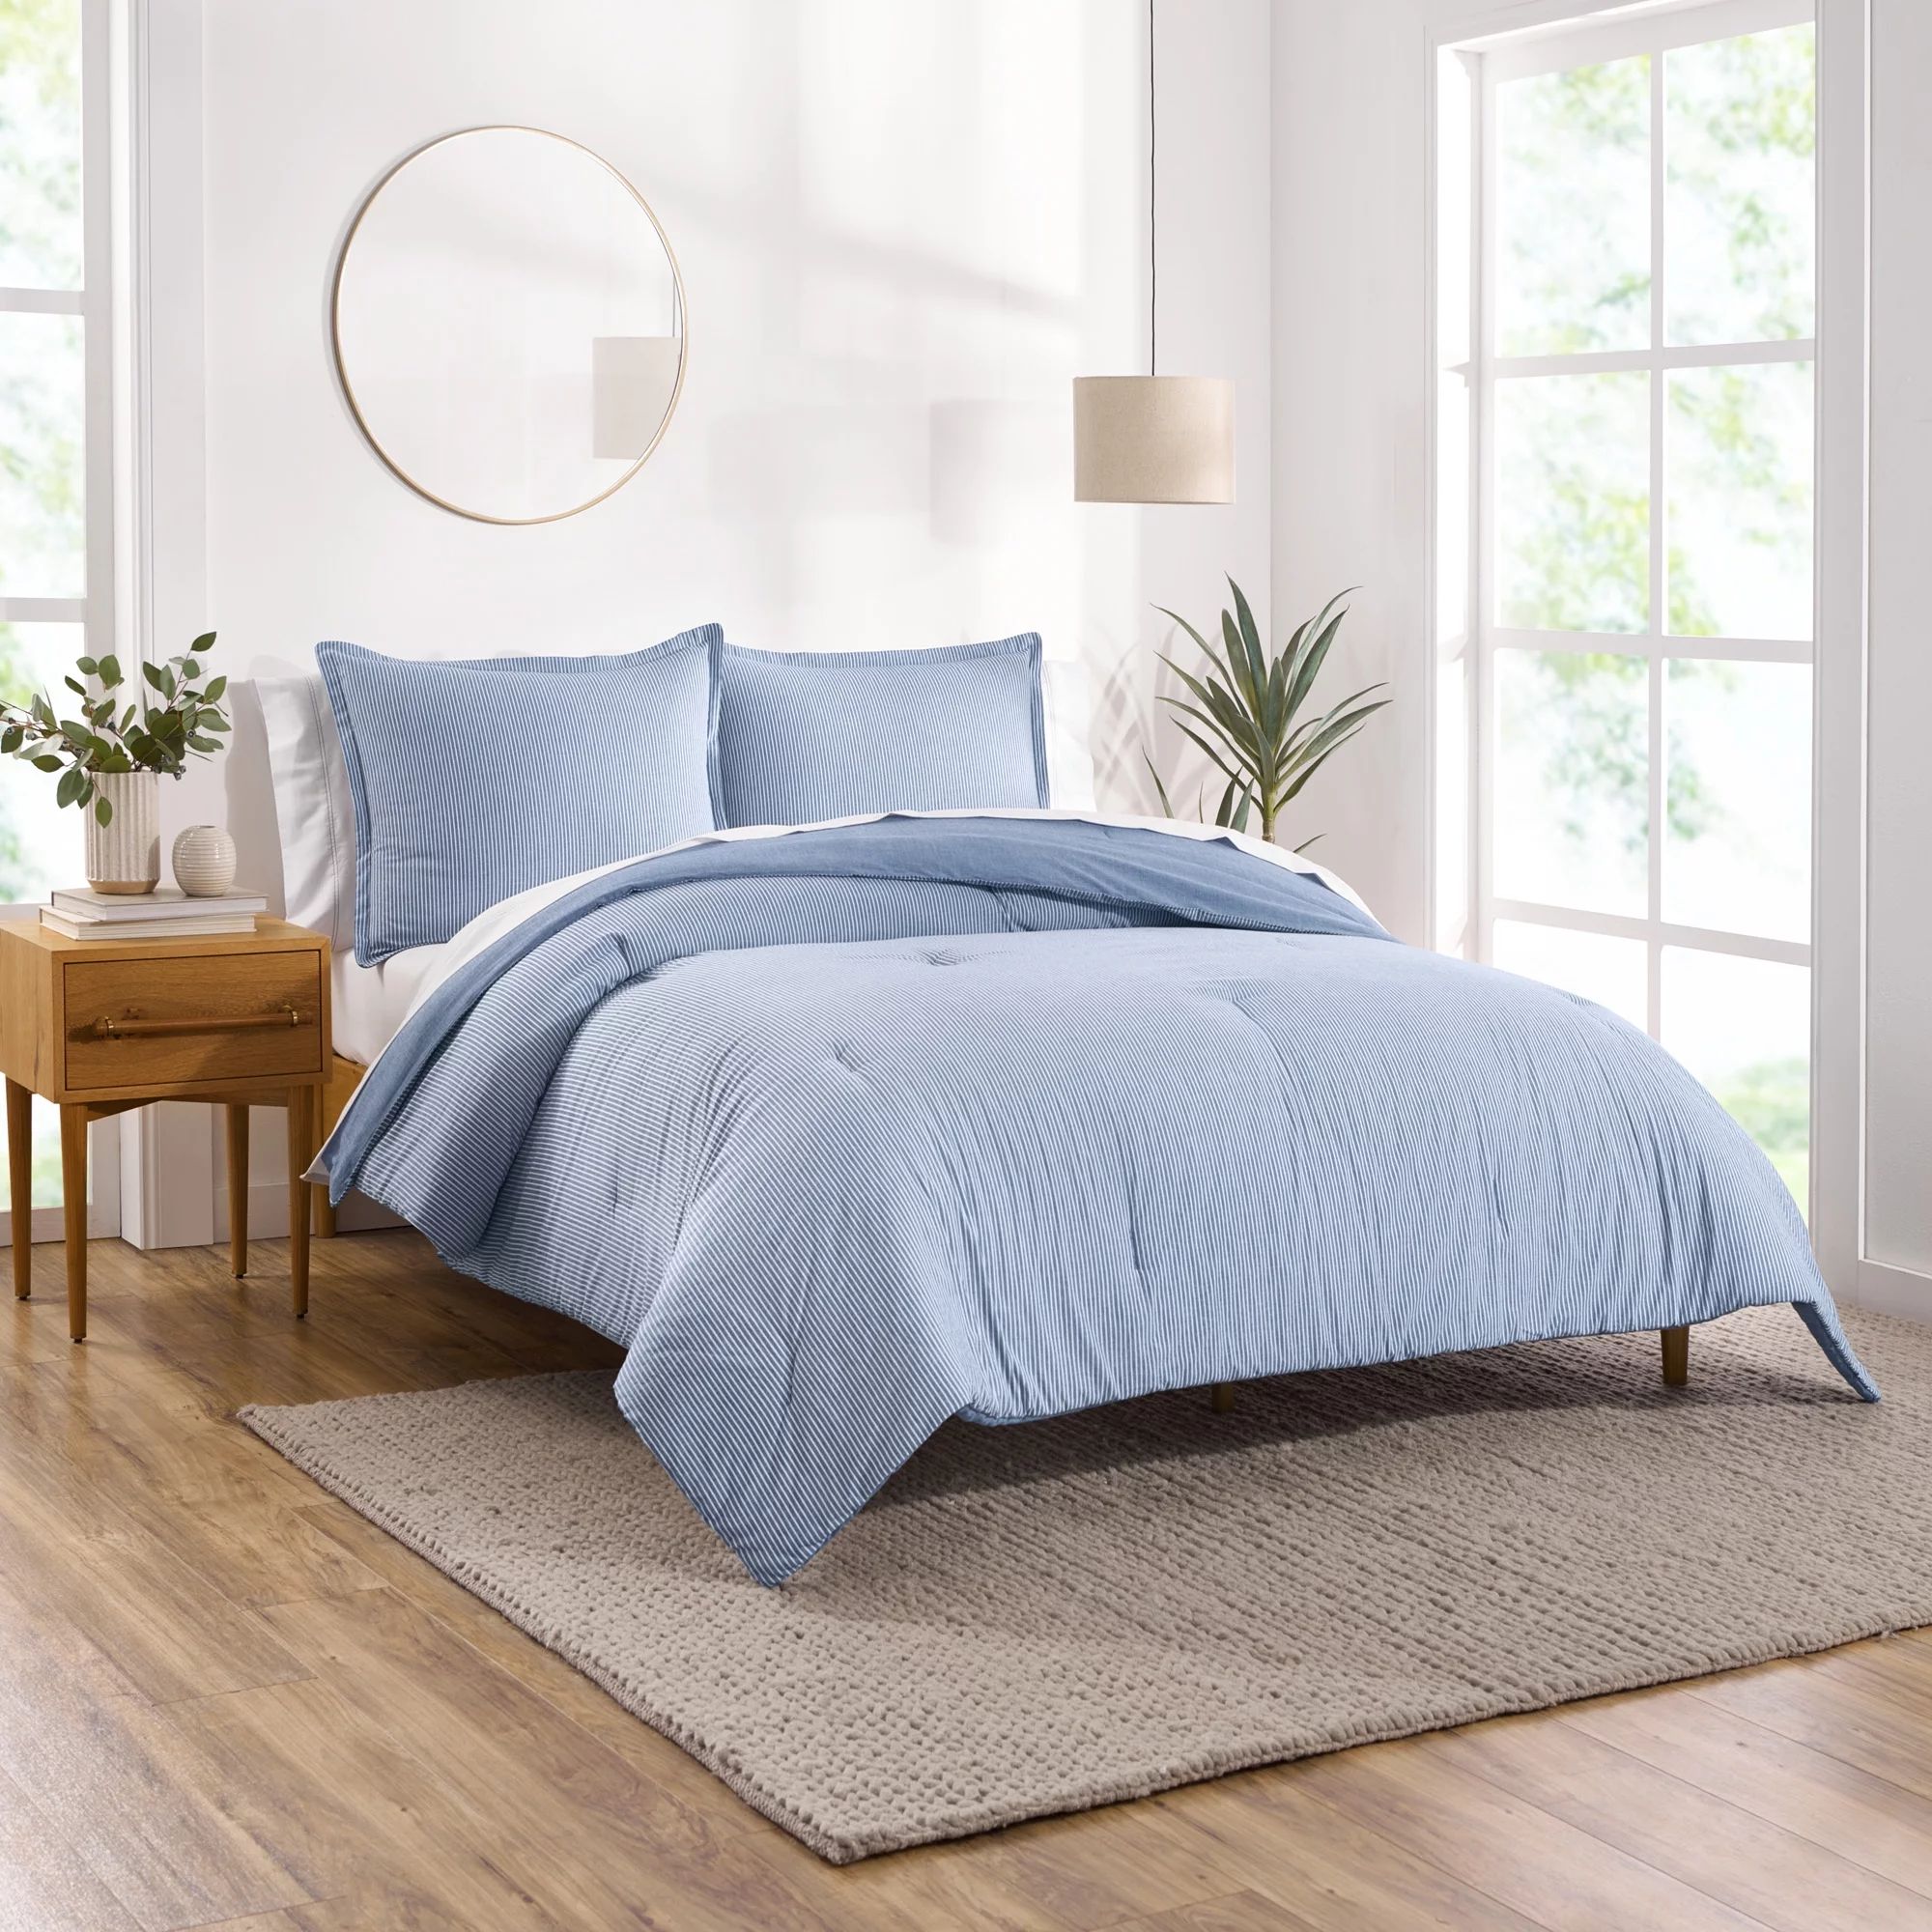 Gap Home Yarn Dyed Washed Chambray Stripe Reversible Organic Cotton Comforter Set, Full/Queen, Bl... | Walmart (US)